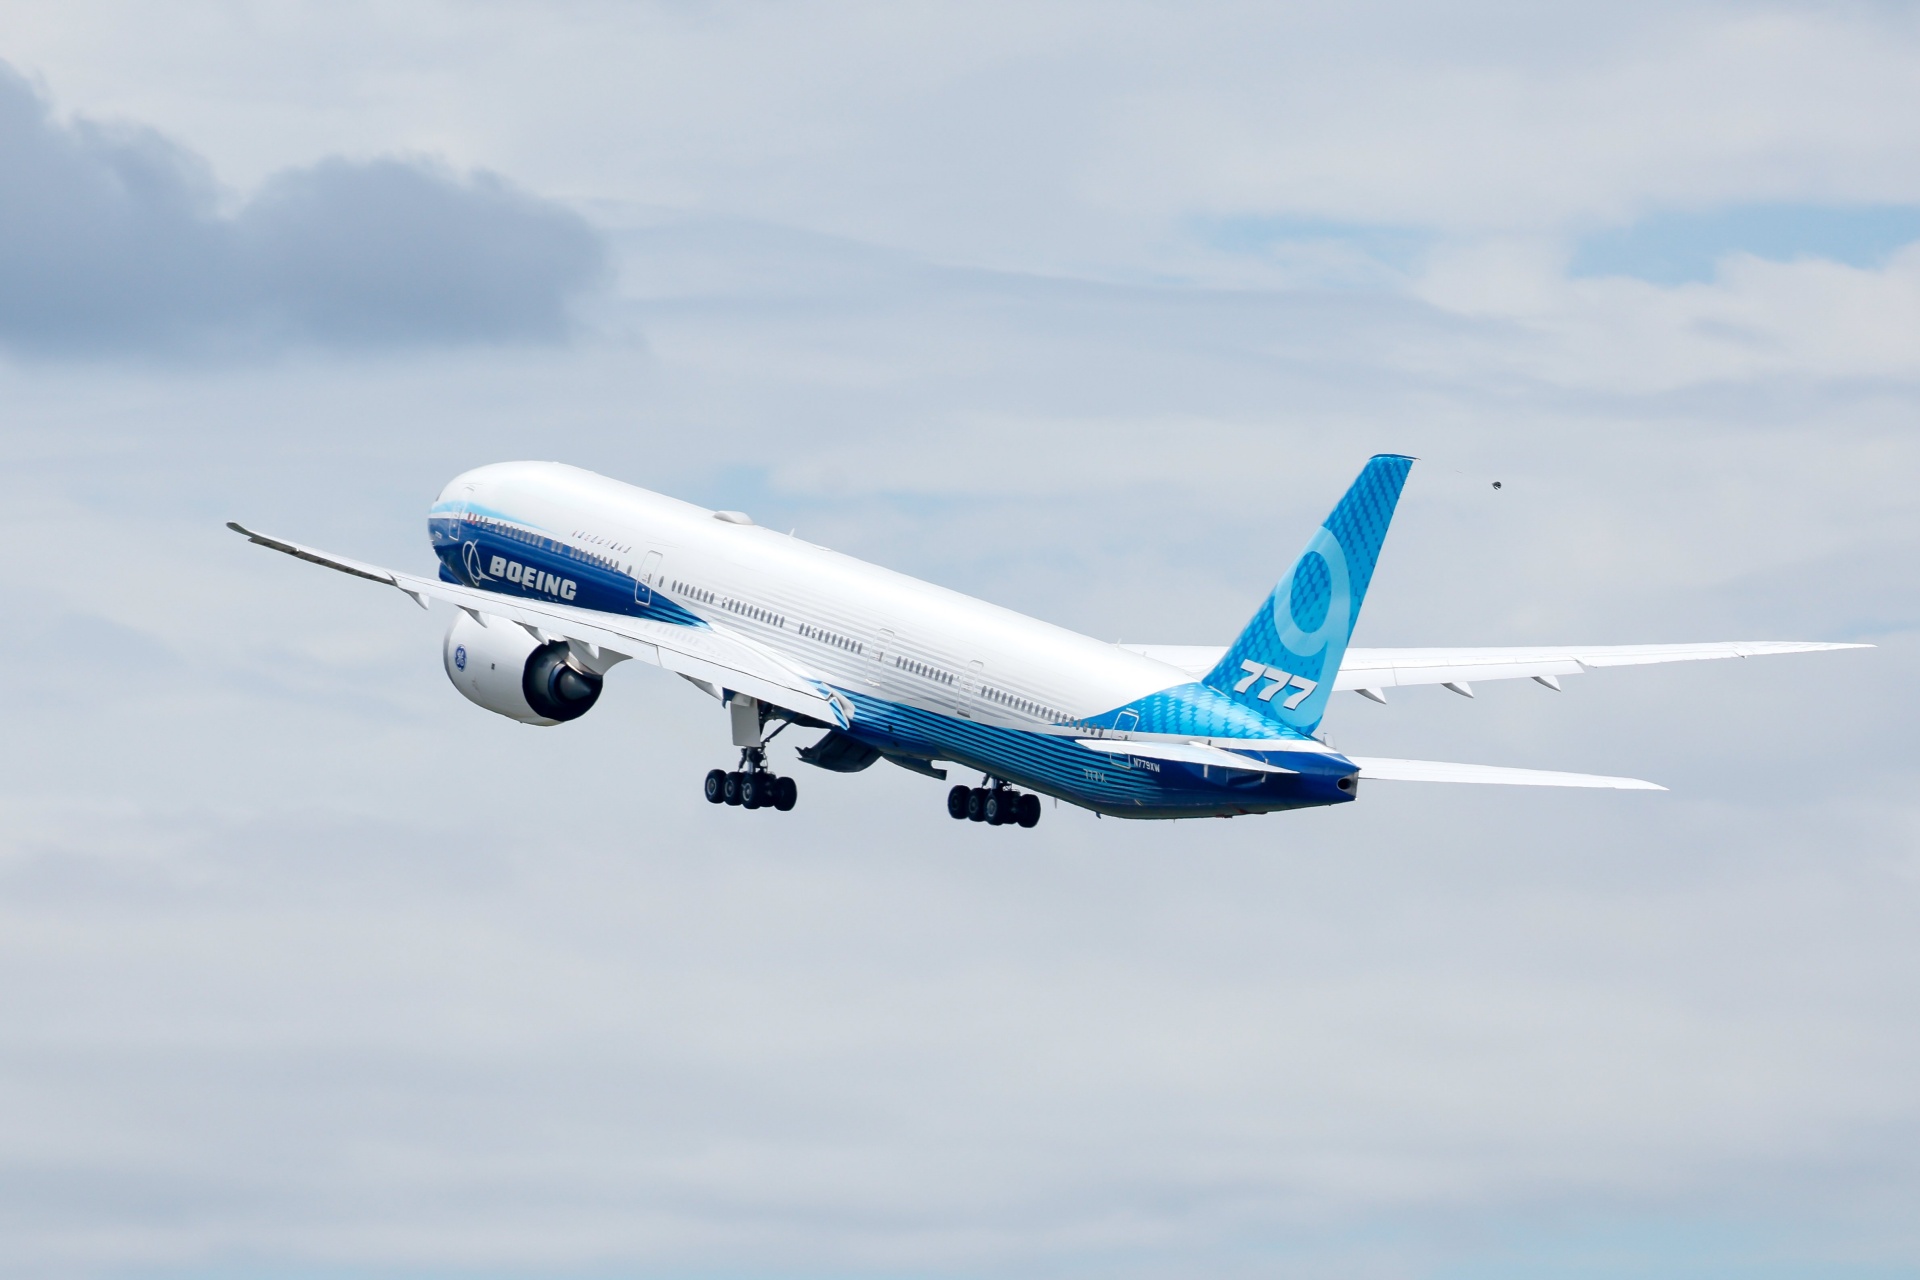 boeing forecasts 24 million demand for worldwide airline personnel over next 20 years